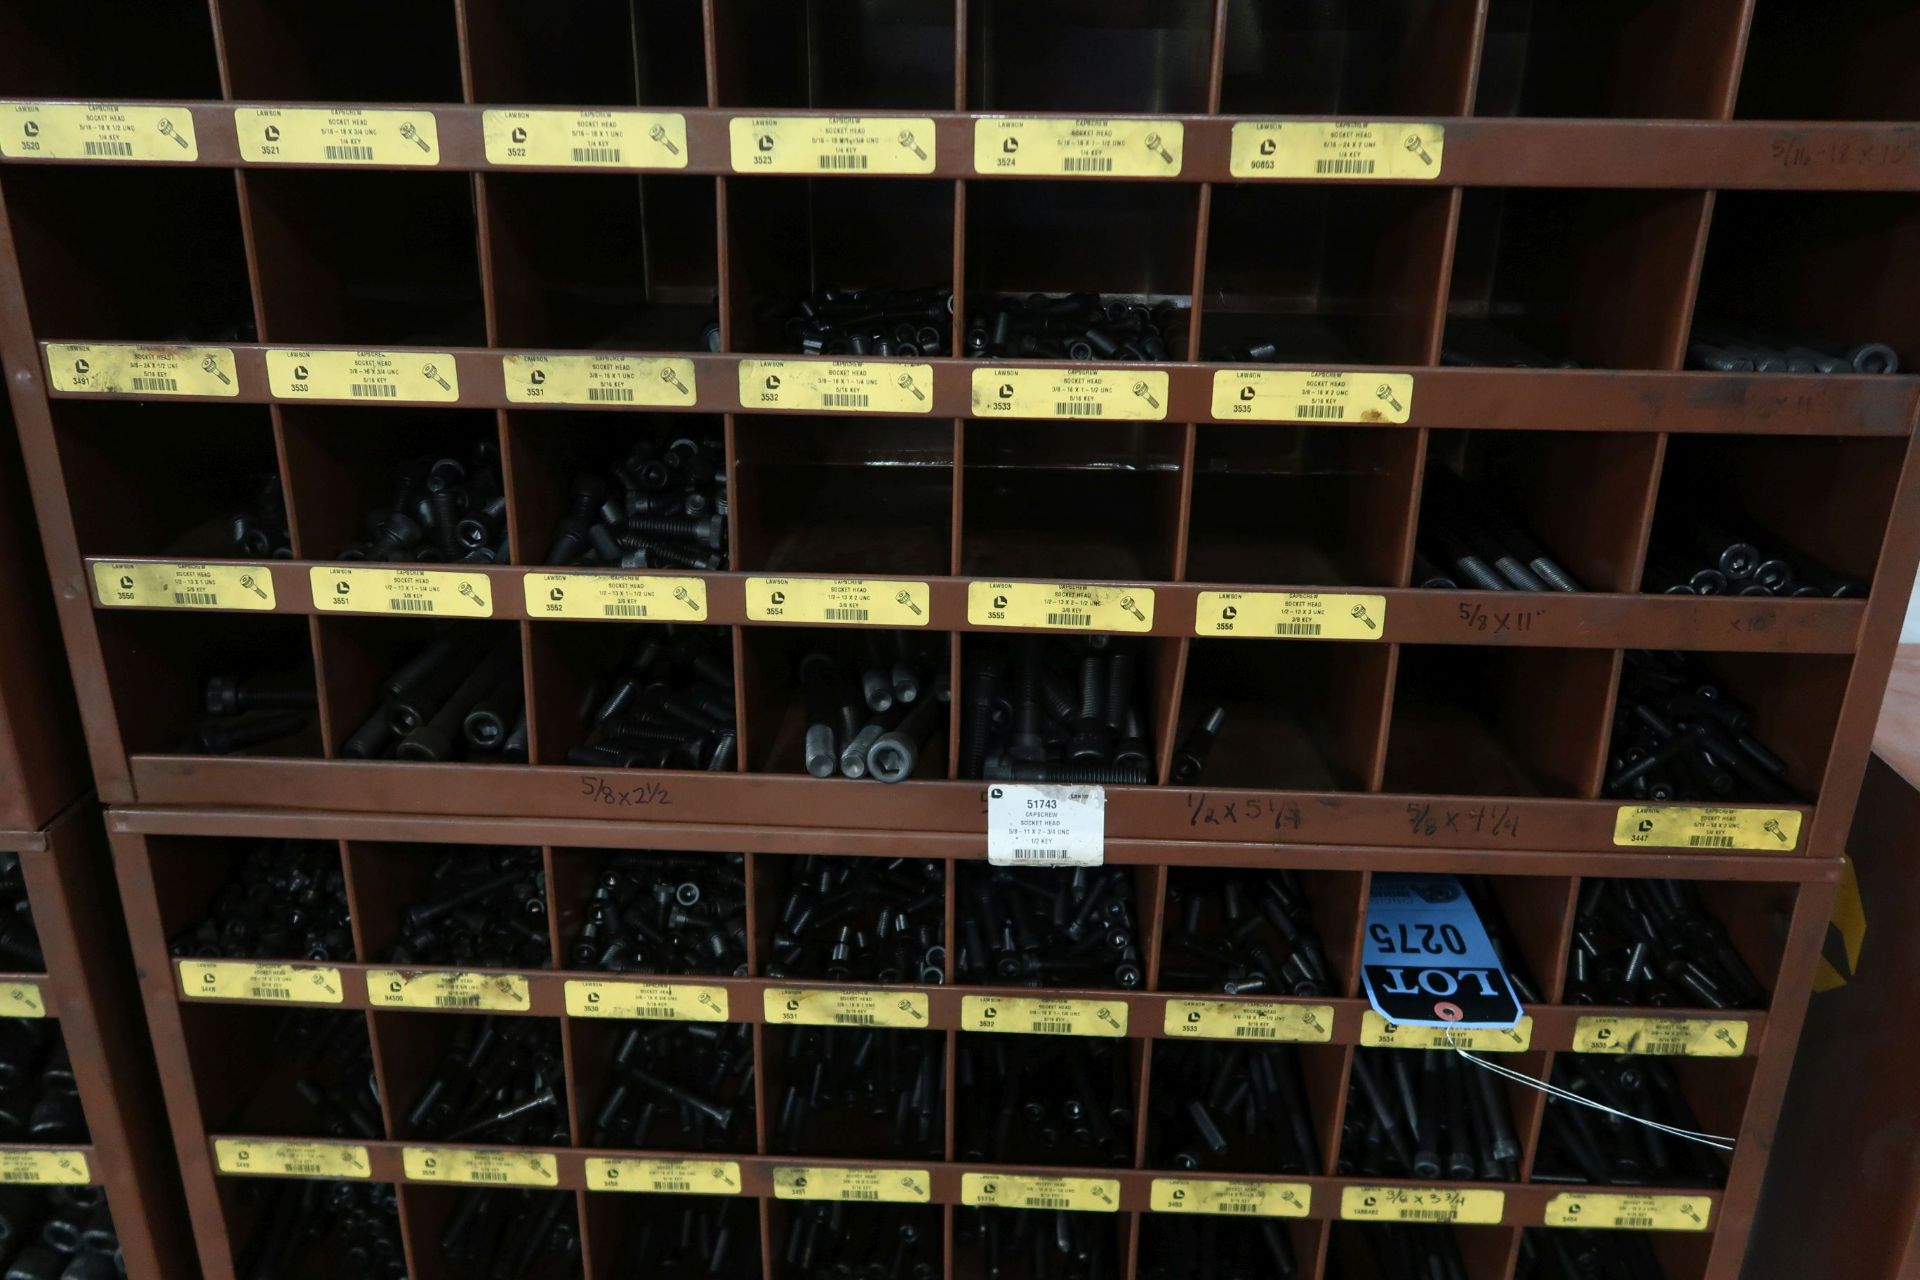 40 BIN AND 72 BIN PIDGEON HOLE HARDWARE CABINET WITH CONTENTS **LOADING PRICE DUE TO ERRA - $25. - Image 2 of 3